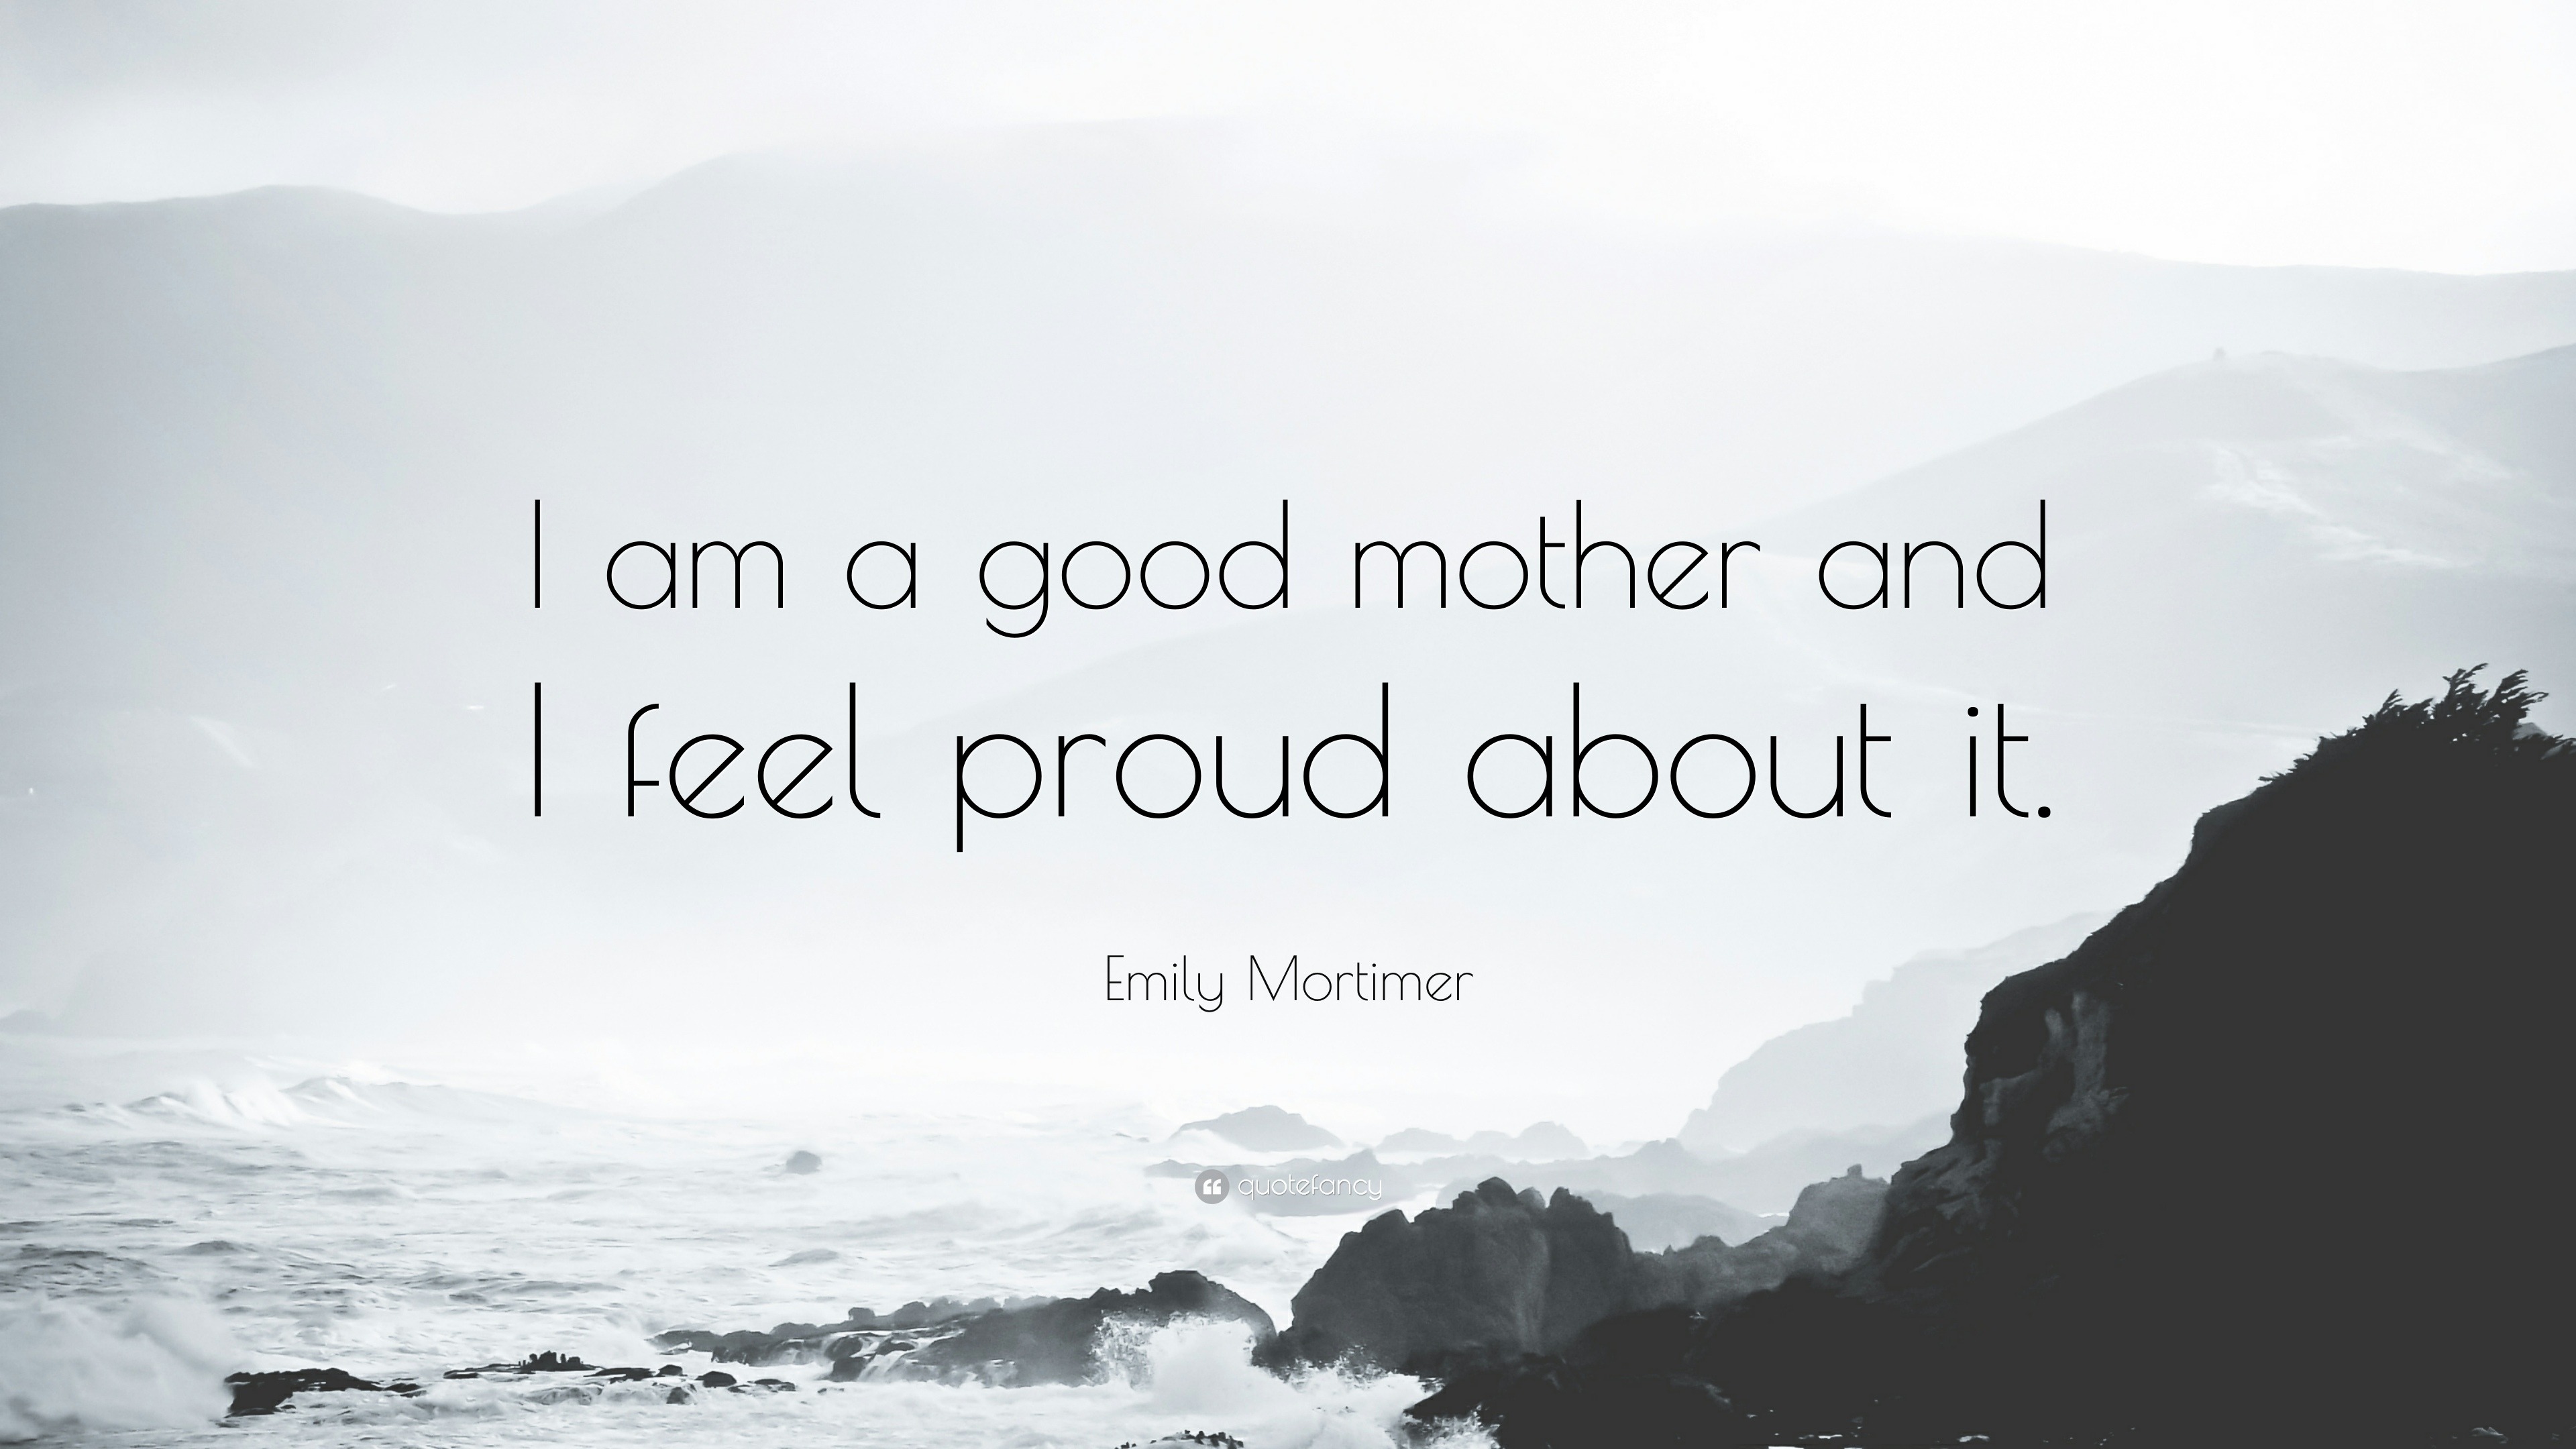 Top 30 Emily Mortimer Quotes (2023 Update) - Quotefancy